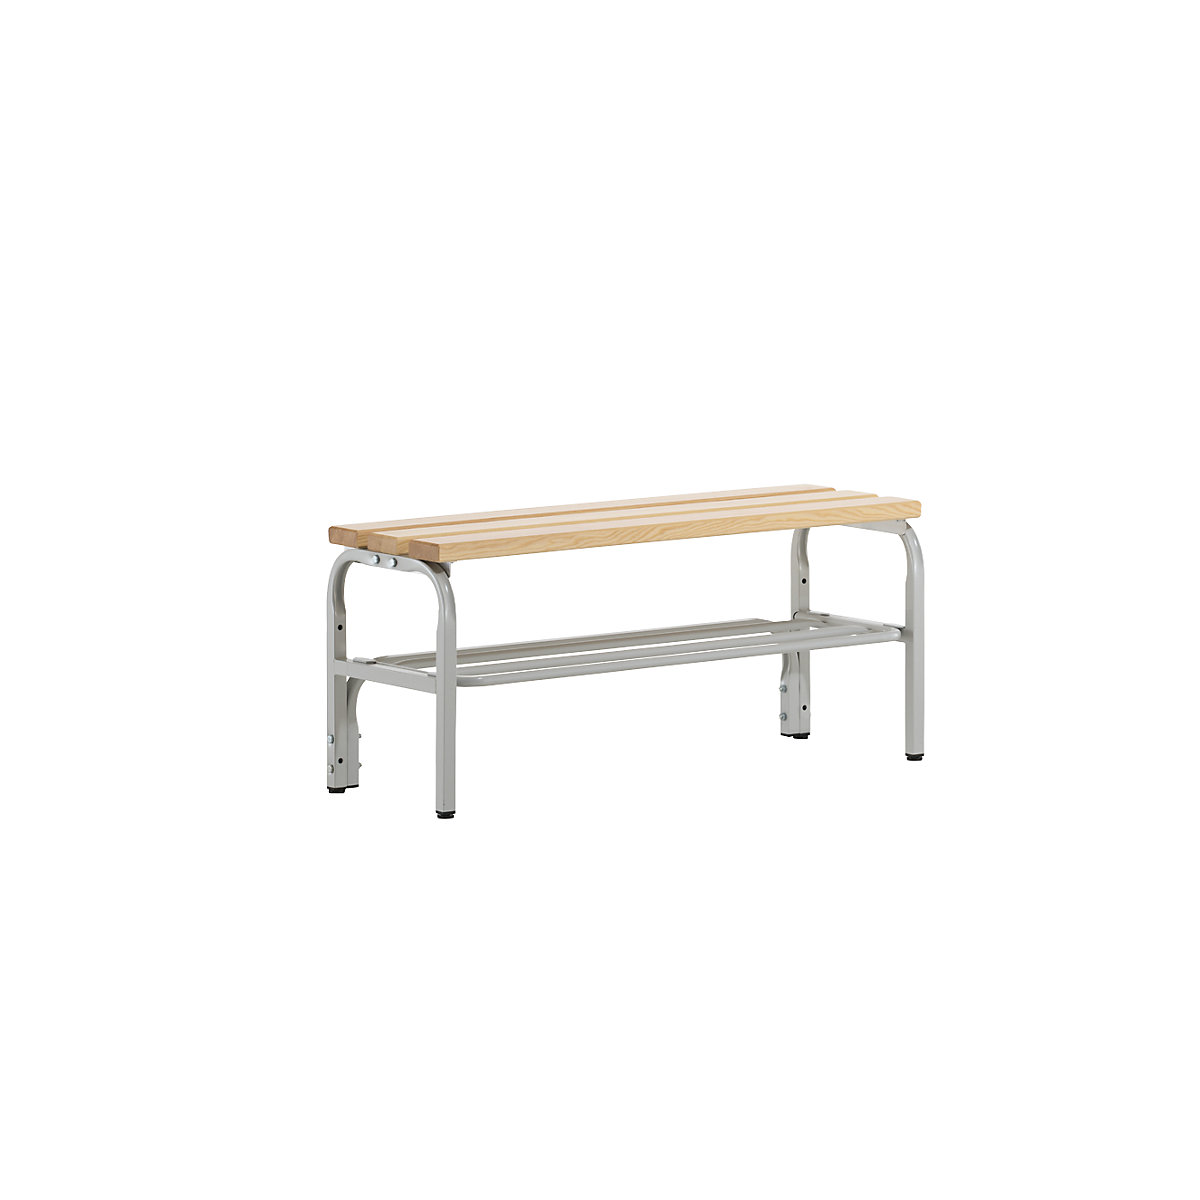 Cloakroom bench – Sypro